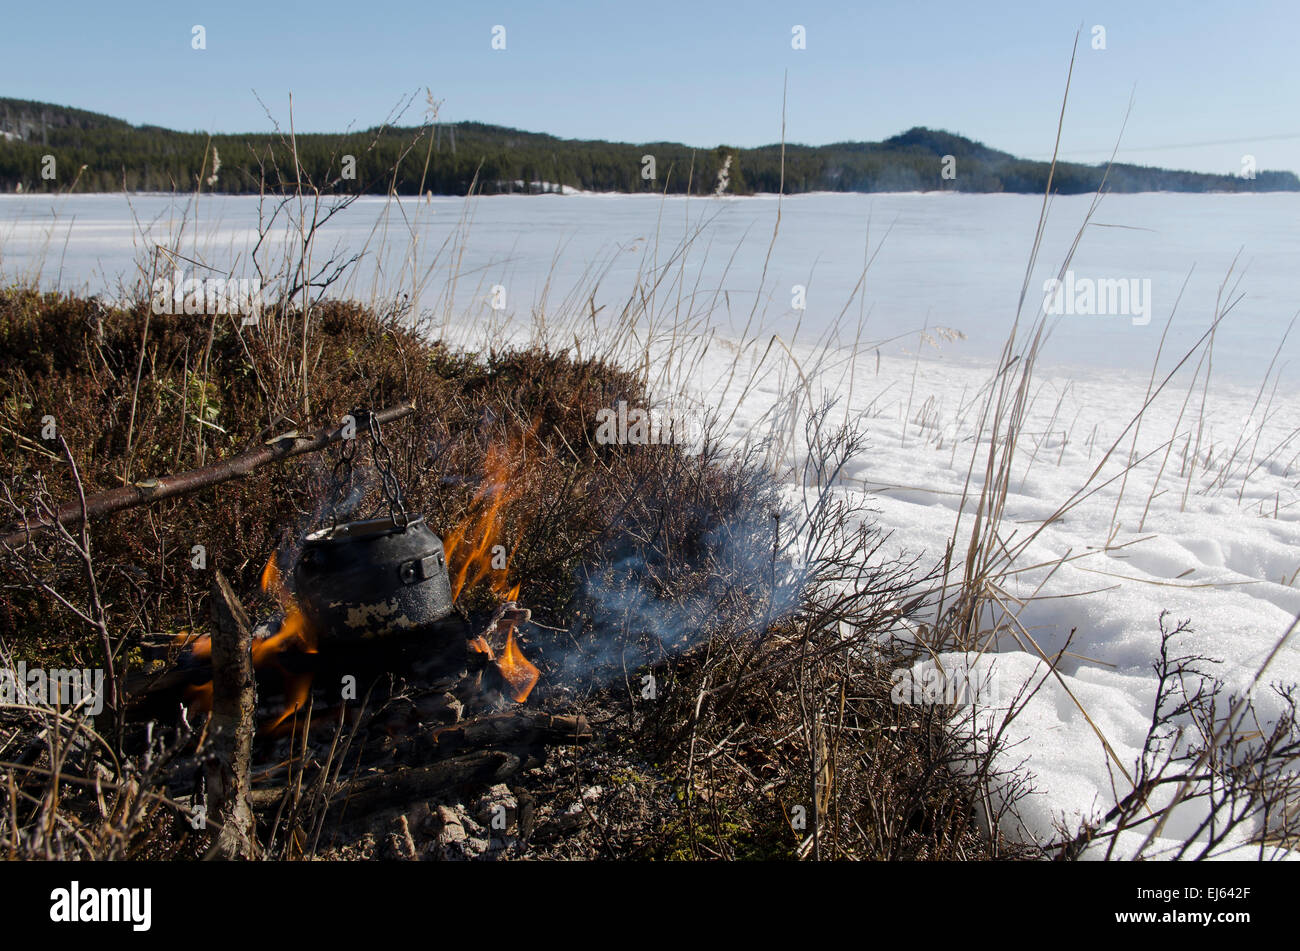 https://c8.alamy.com/comp/EJ642F/making-coffee-over-open-fire-out-the-nature-in-north-of-sweden-EJ642F.jpg